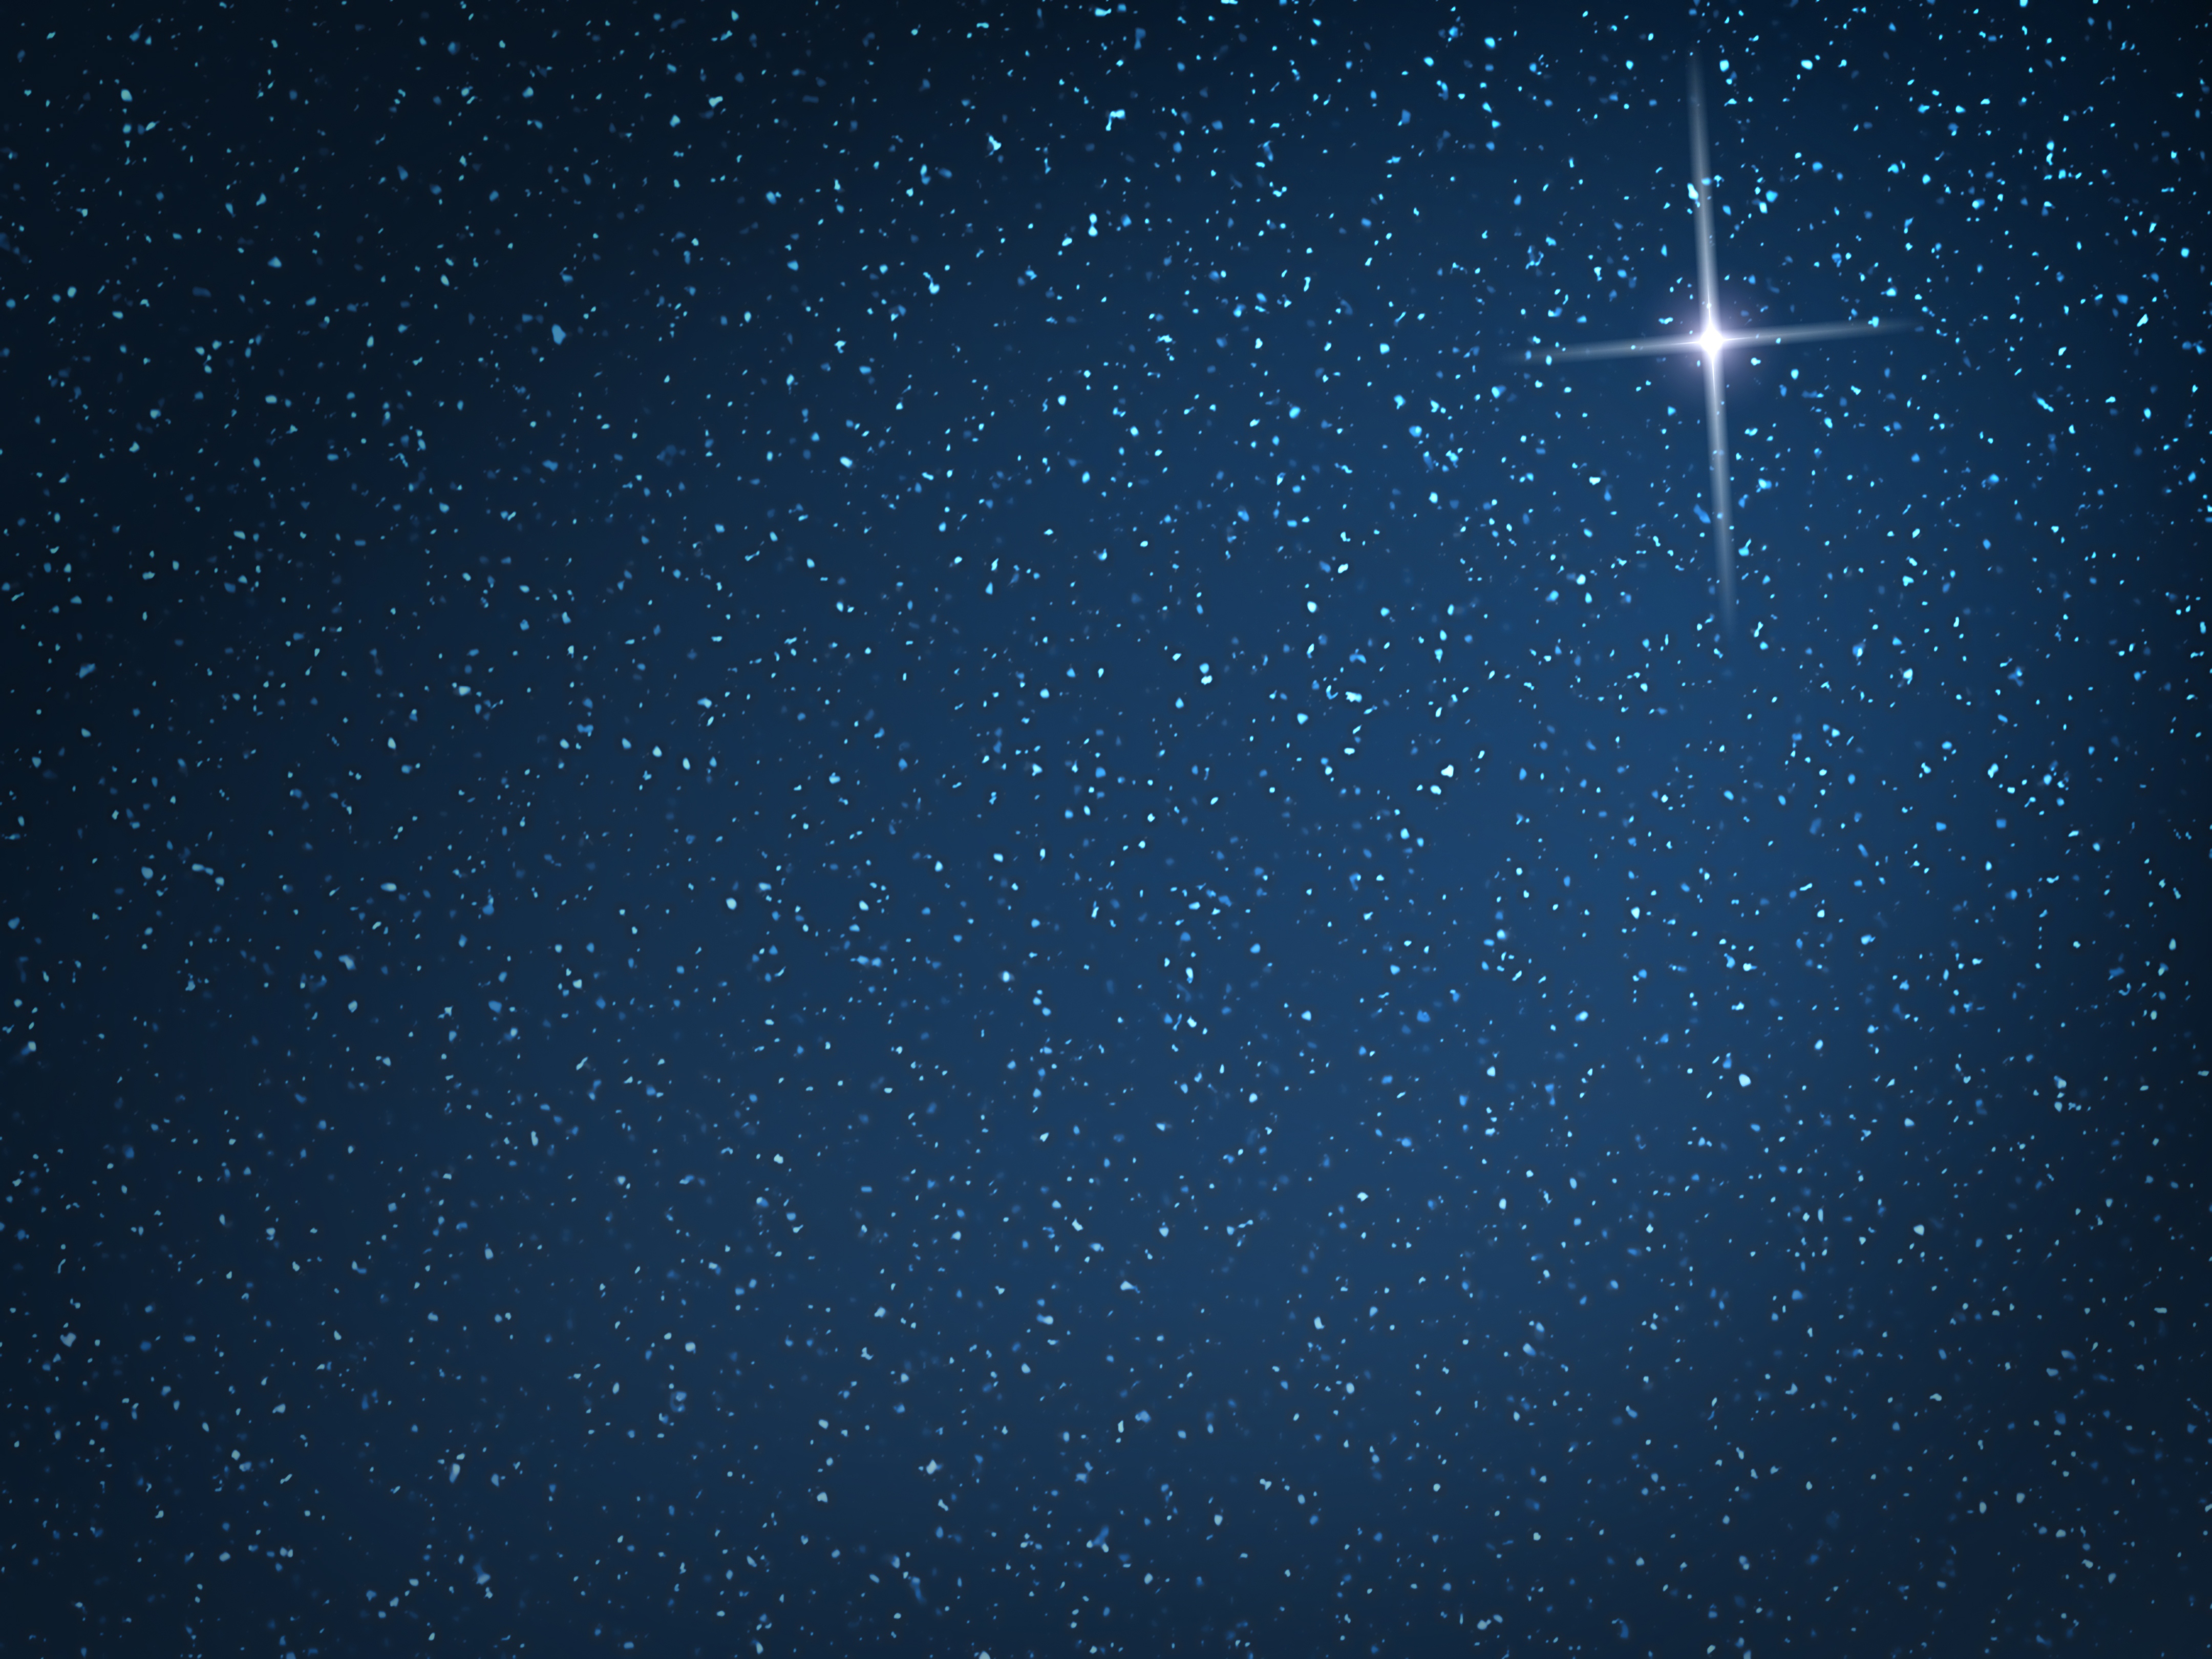 Bright Morning Star A-Rising | Sojourners